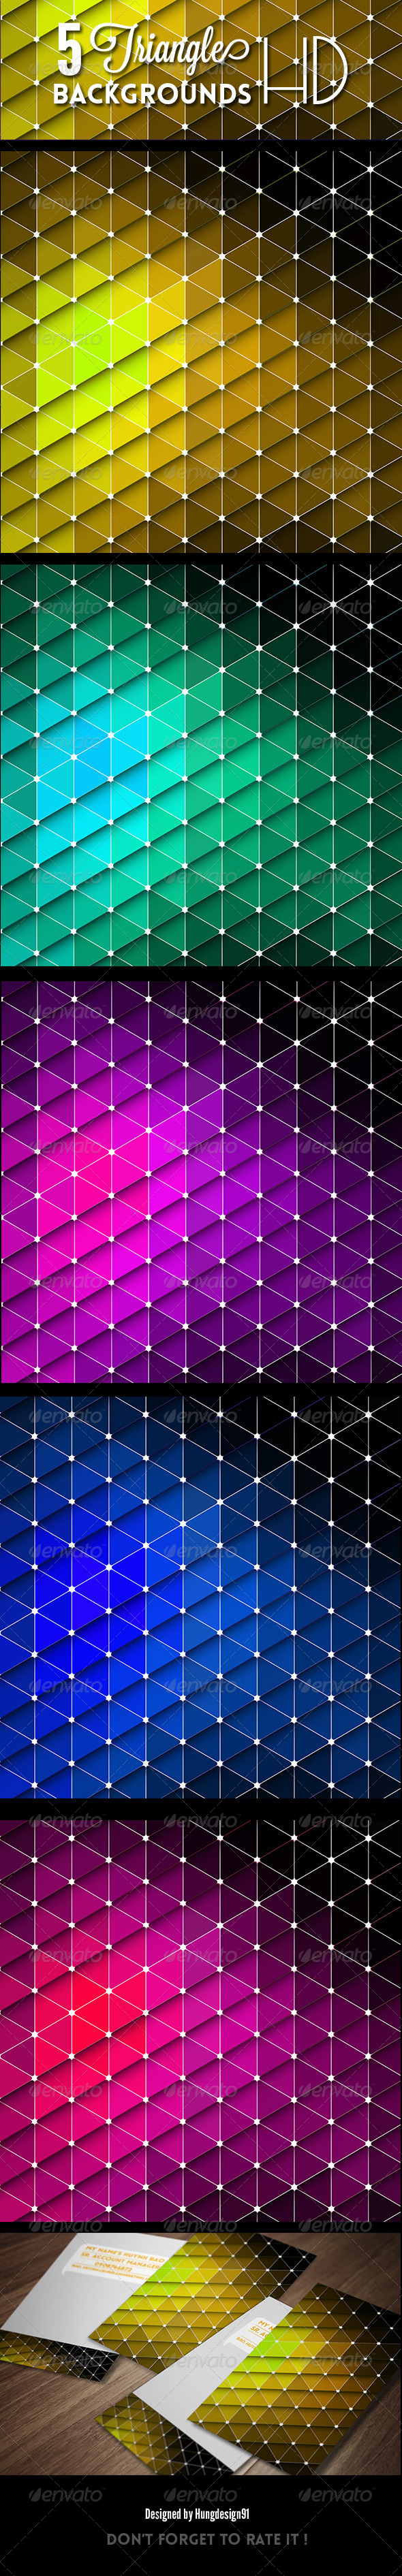 5 Triangle Backgrounds HD